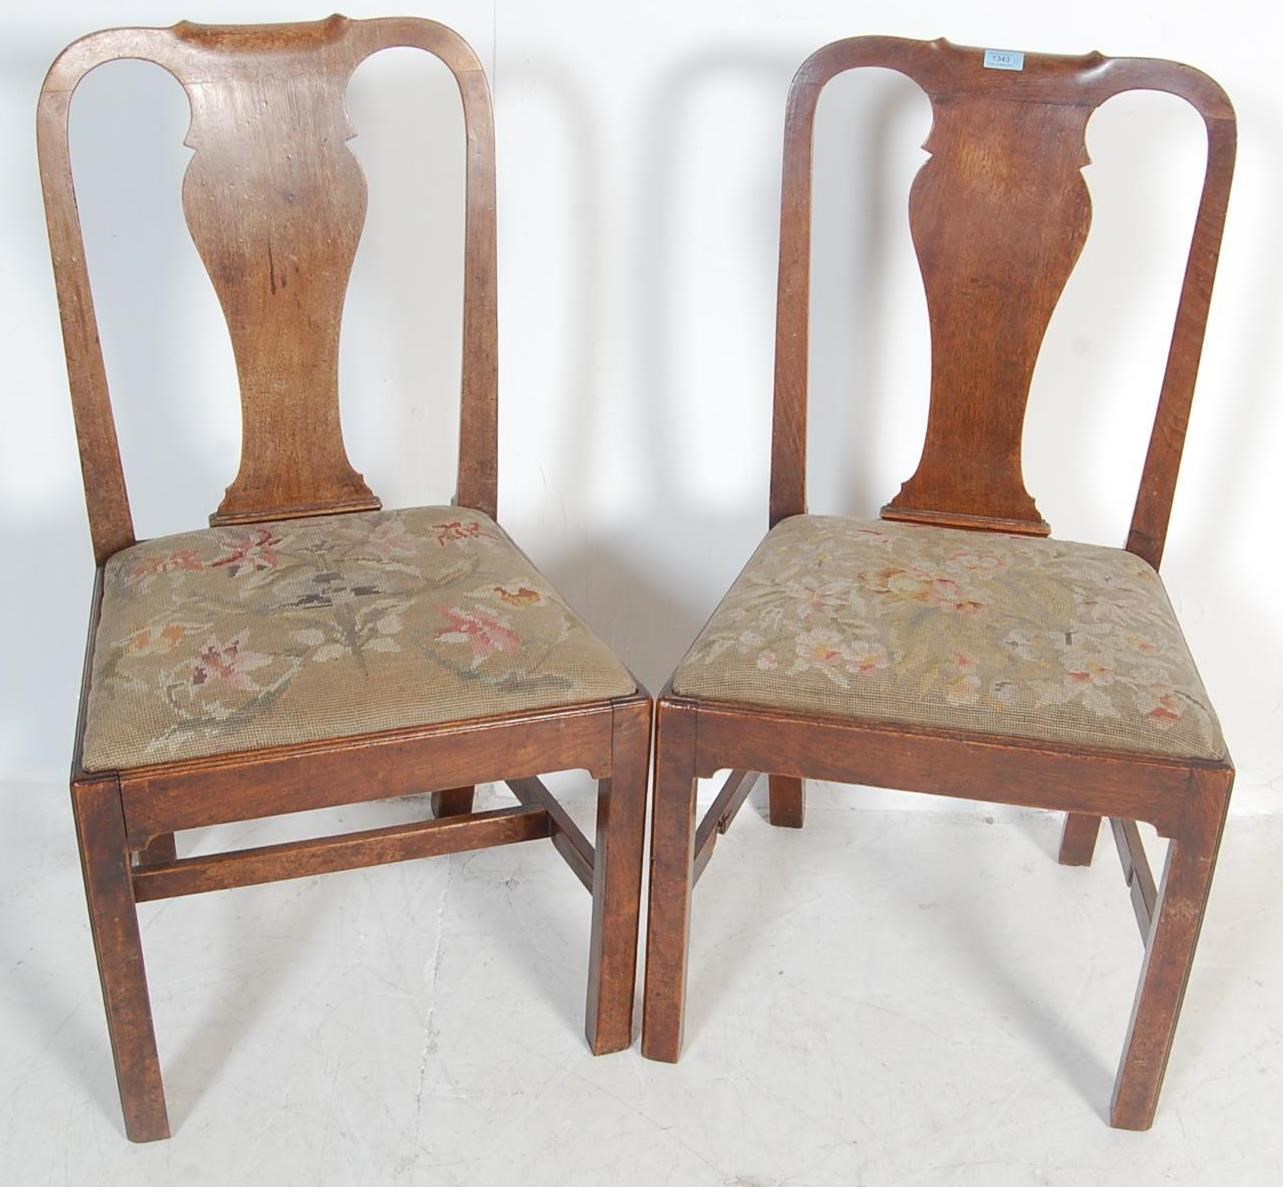 PAIR 18TH CENTURY QUEEN ANNE OAK BEDROOM CHAIRS - Image 2 of 8